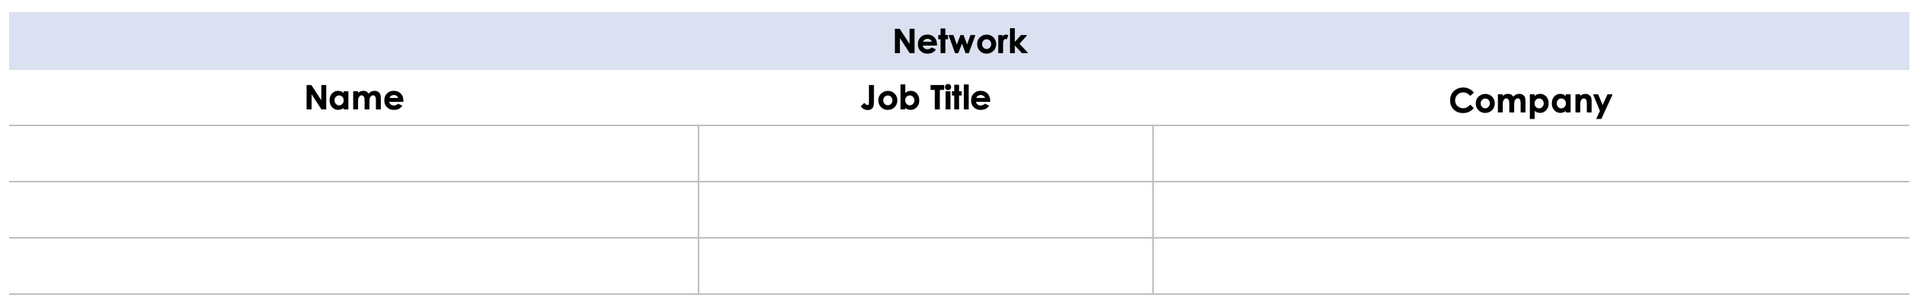 Job details Section in Work Transition Plan Template